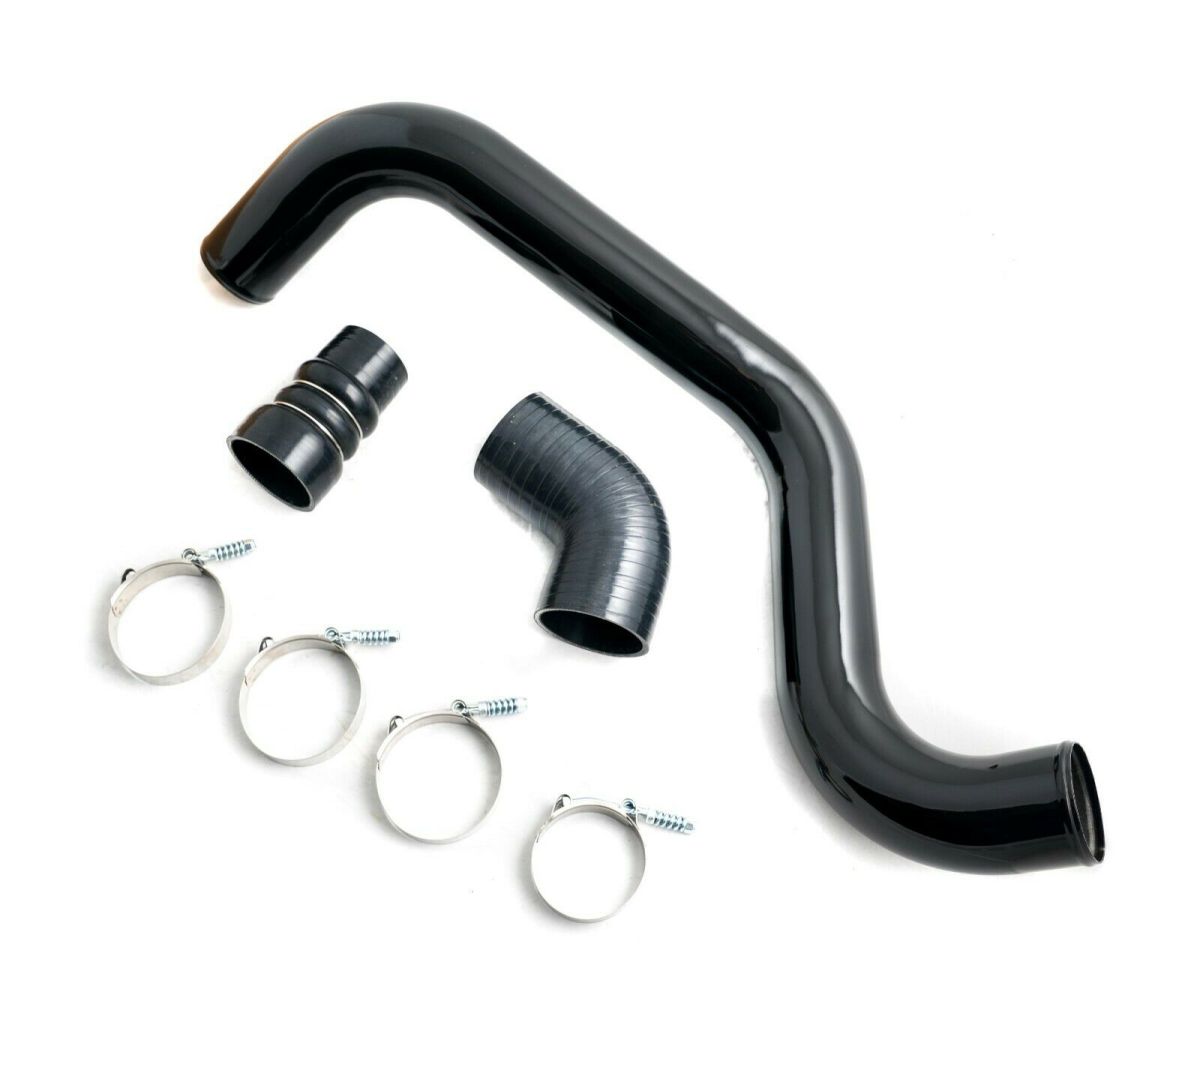 Rudy's Performance Parts - Hot Side Intercooler Pipe 2004.5-2010 Chevy GMC Duramax Diesel 6.6L LLY LBZ LMM